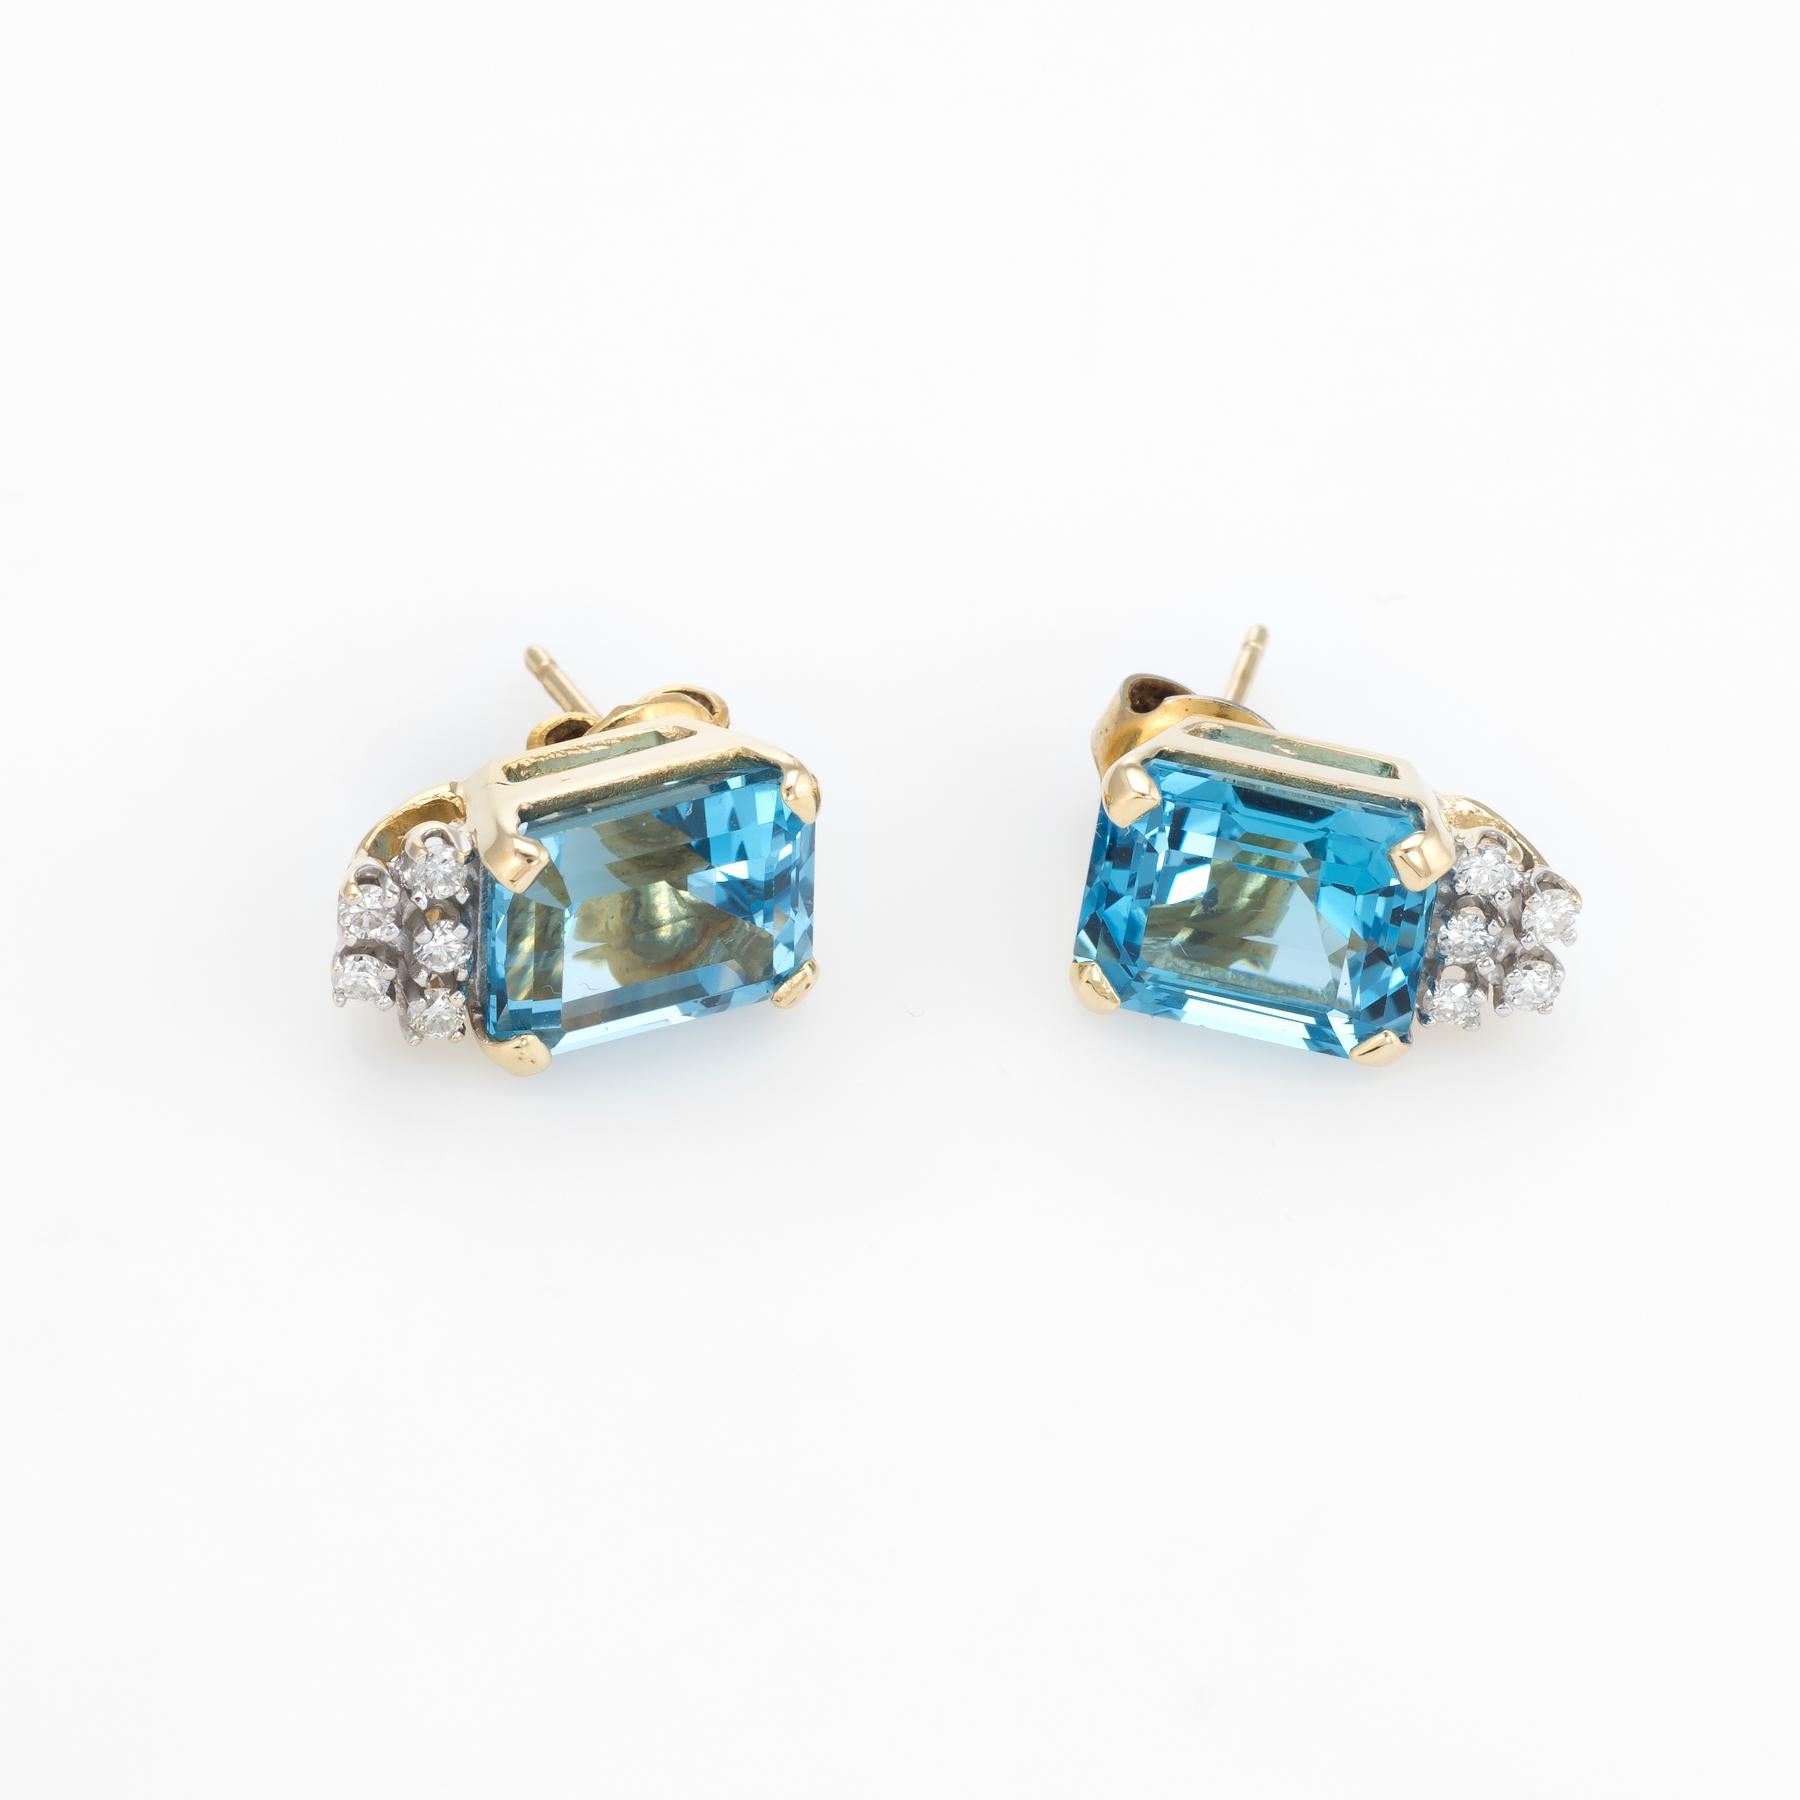 Elegant pair of estate blue topaz & diamond stud earrings, crafted in 14k yellow gold. 

Emerald cut blue topaz measures 10mm x 8mm (estimated at 4.50 carats each - 9 carats total estimated weight), accented with 10 estimated 0.01 carat round